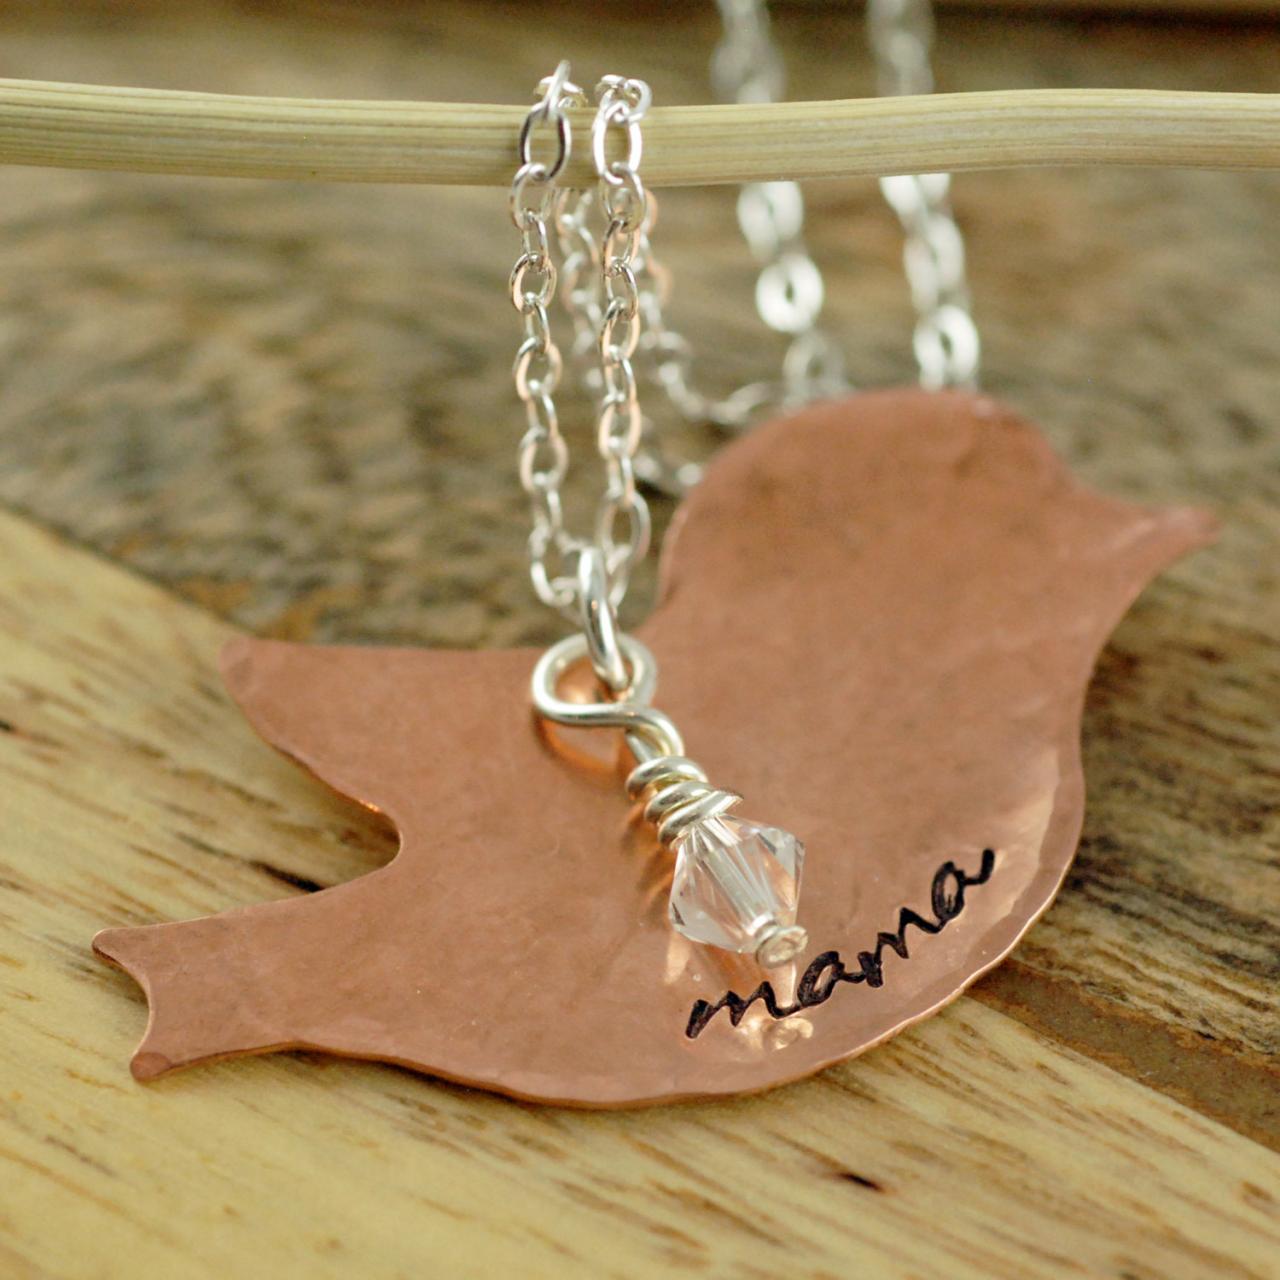 Personalized Copper Bird Necklace - Hand Stamped Jewelry - Mom Necklace - Gift For Her - Personalized Hand Stamped Necklace - Birthstone